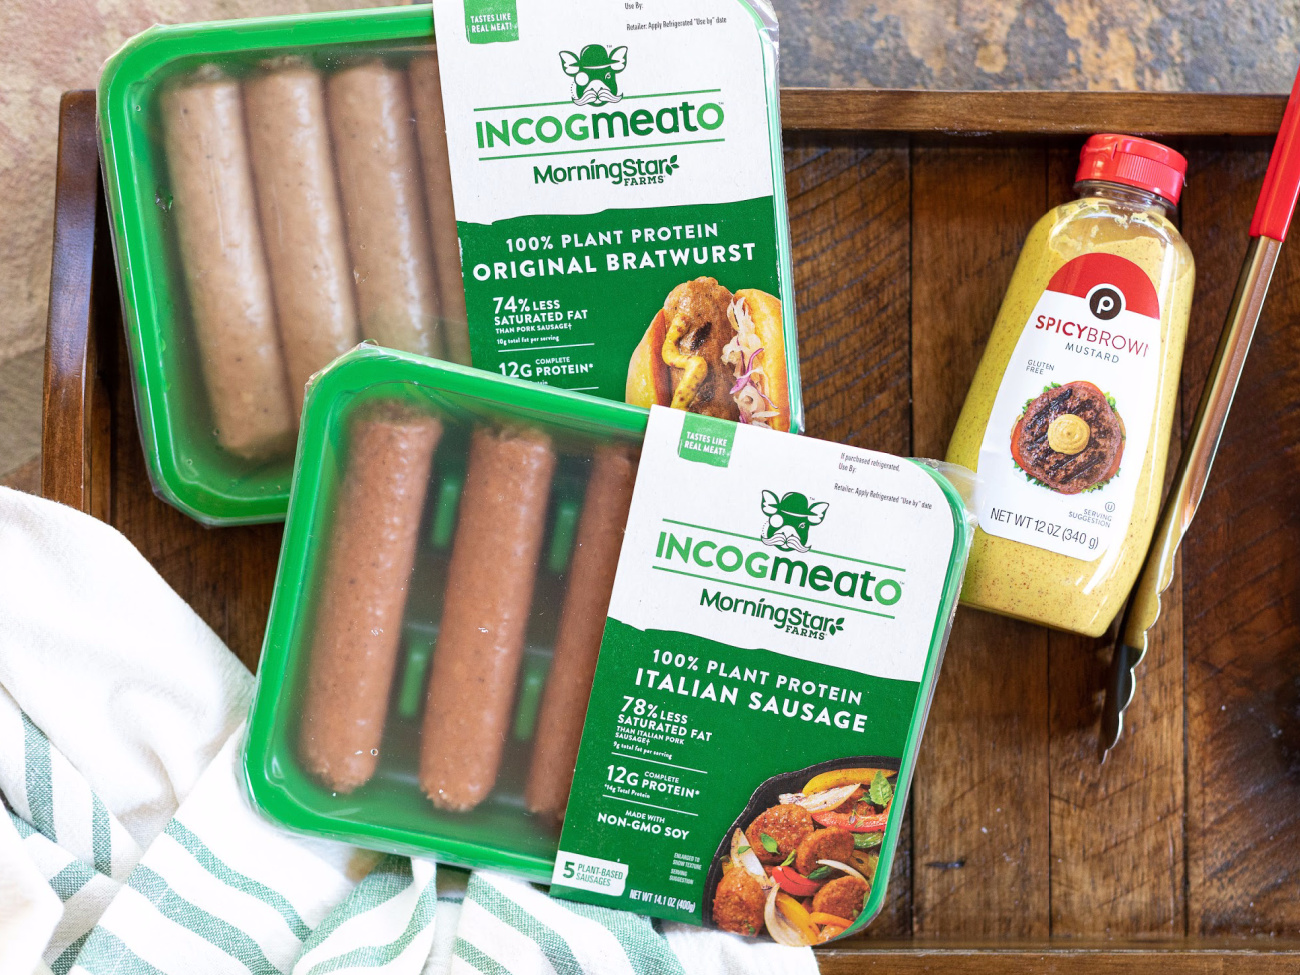 Incogmeato Bratwurst and Italian Sausage Products Are Available At Select Publix Stores - Tasty, Juicy And 100% Plant Based! on I Heart Publix 4